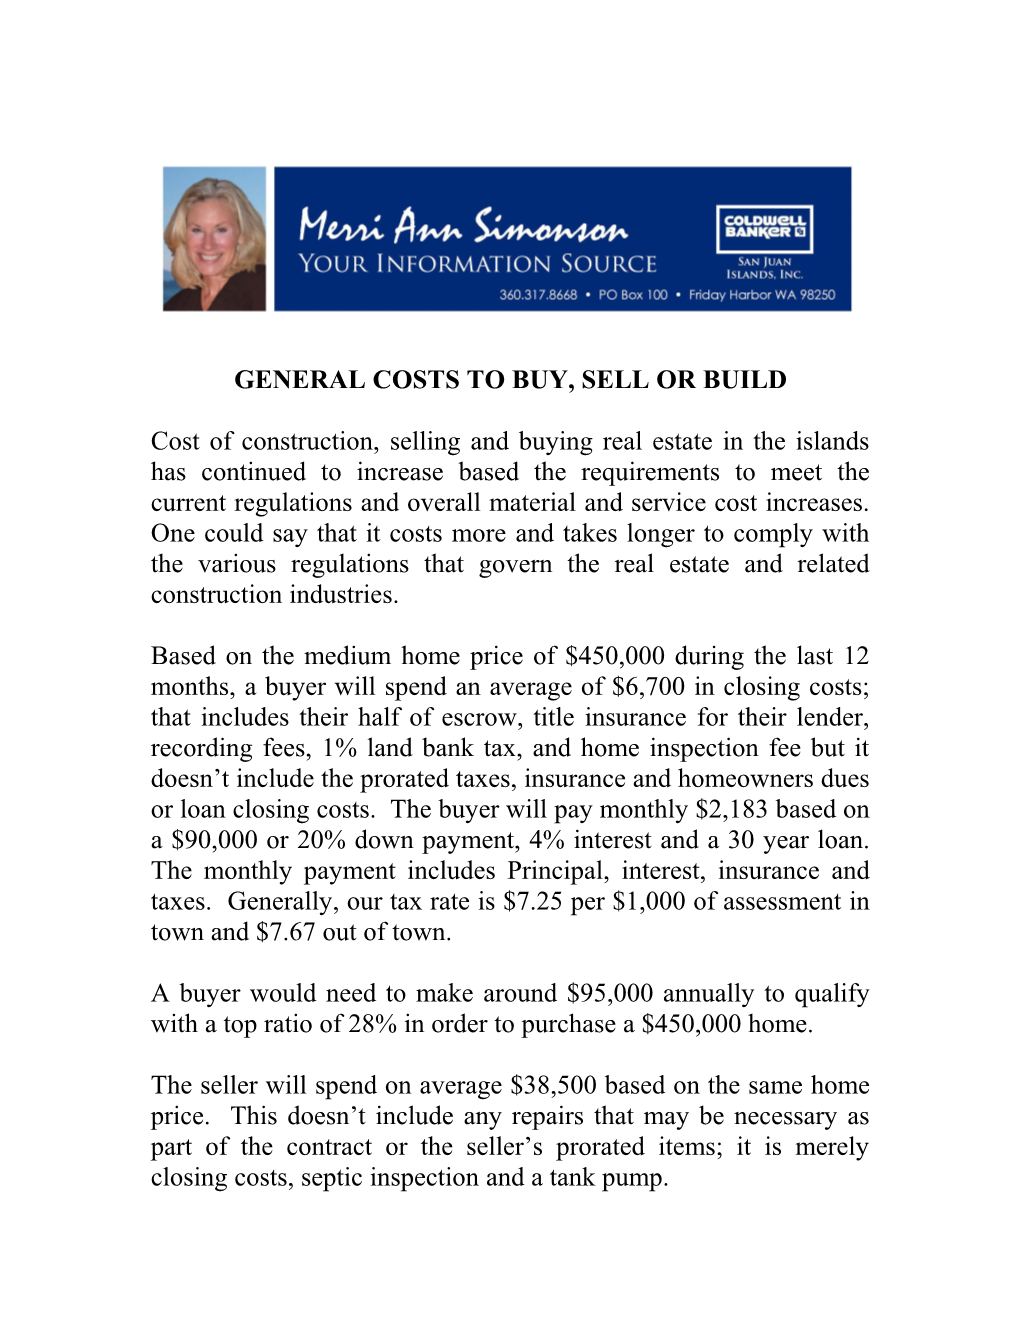 General Costs to Buy, Sell Or Build